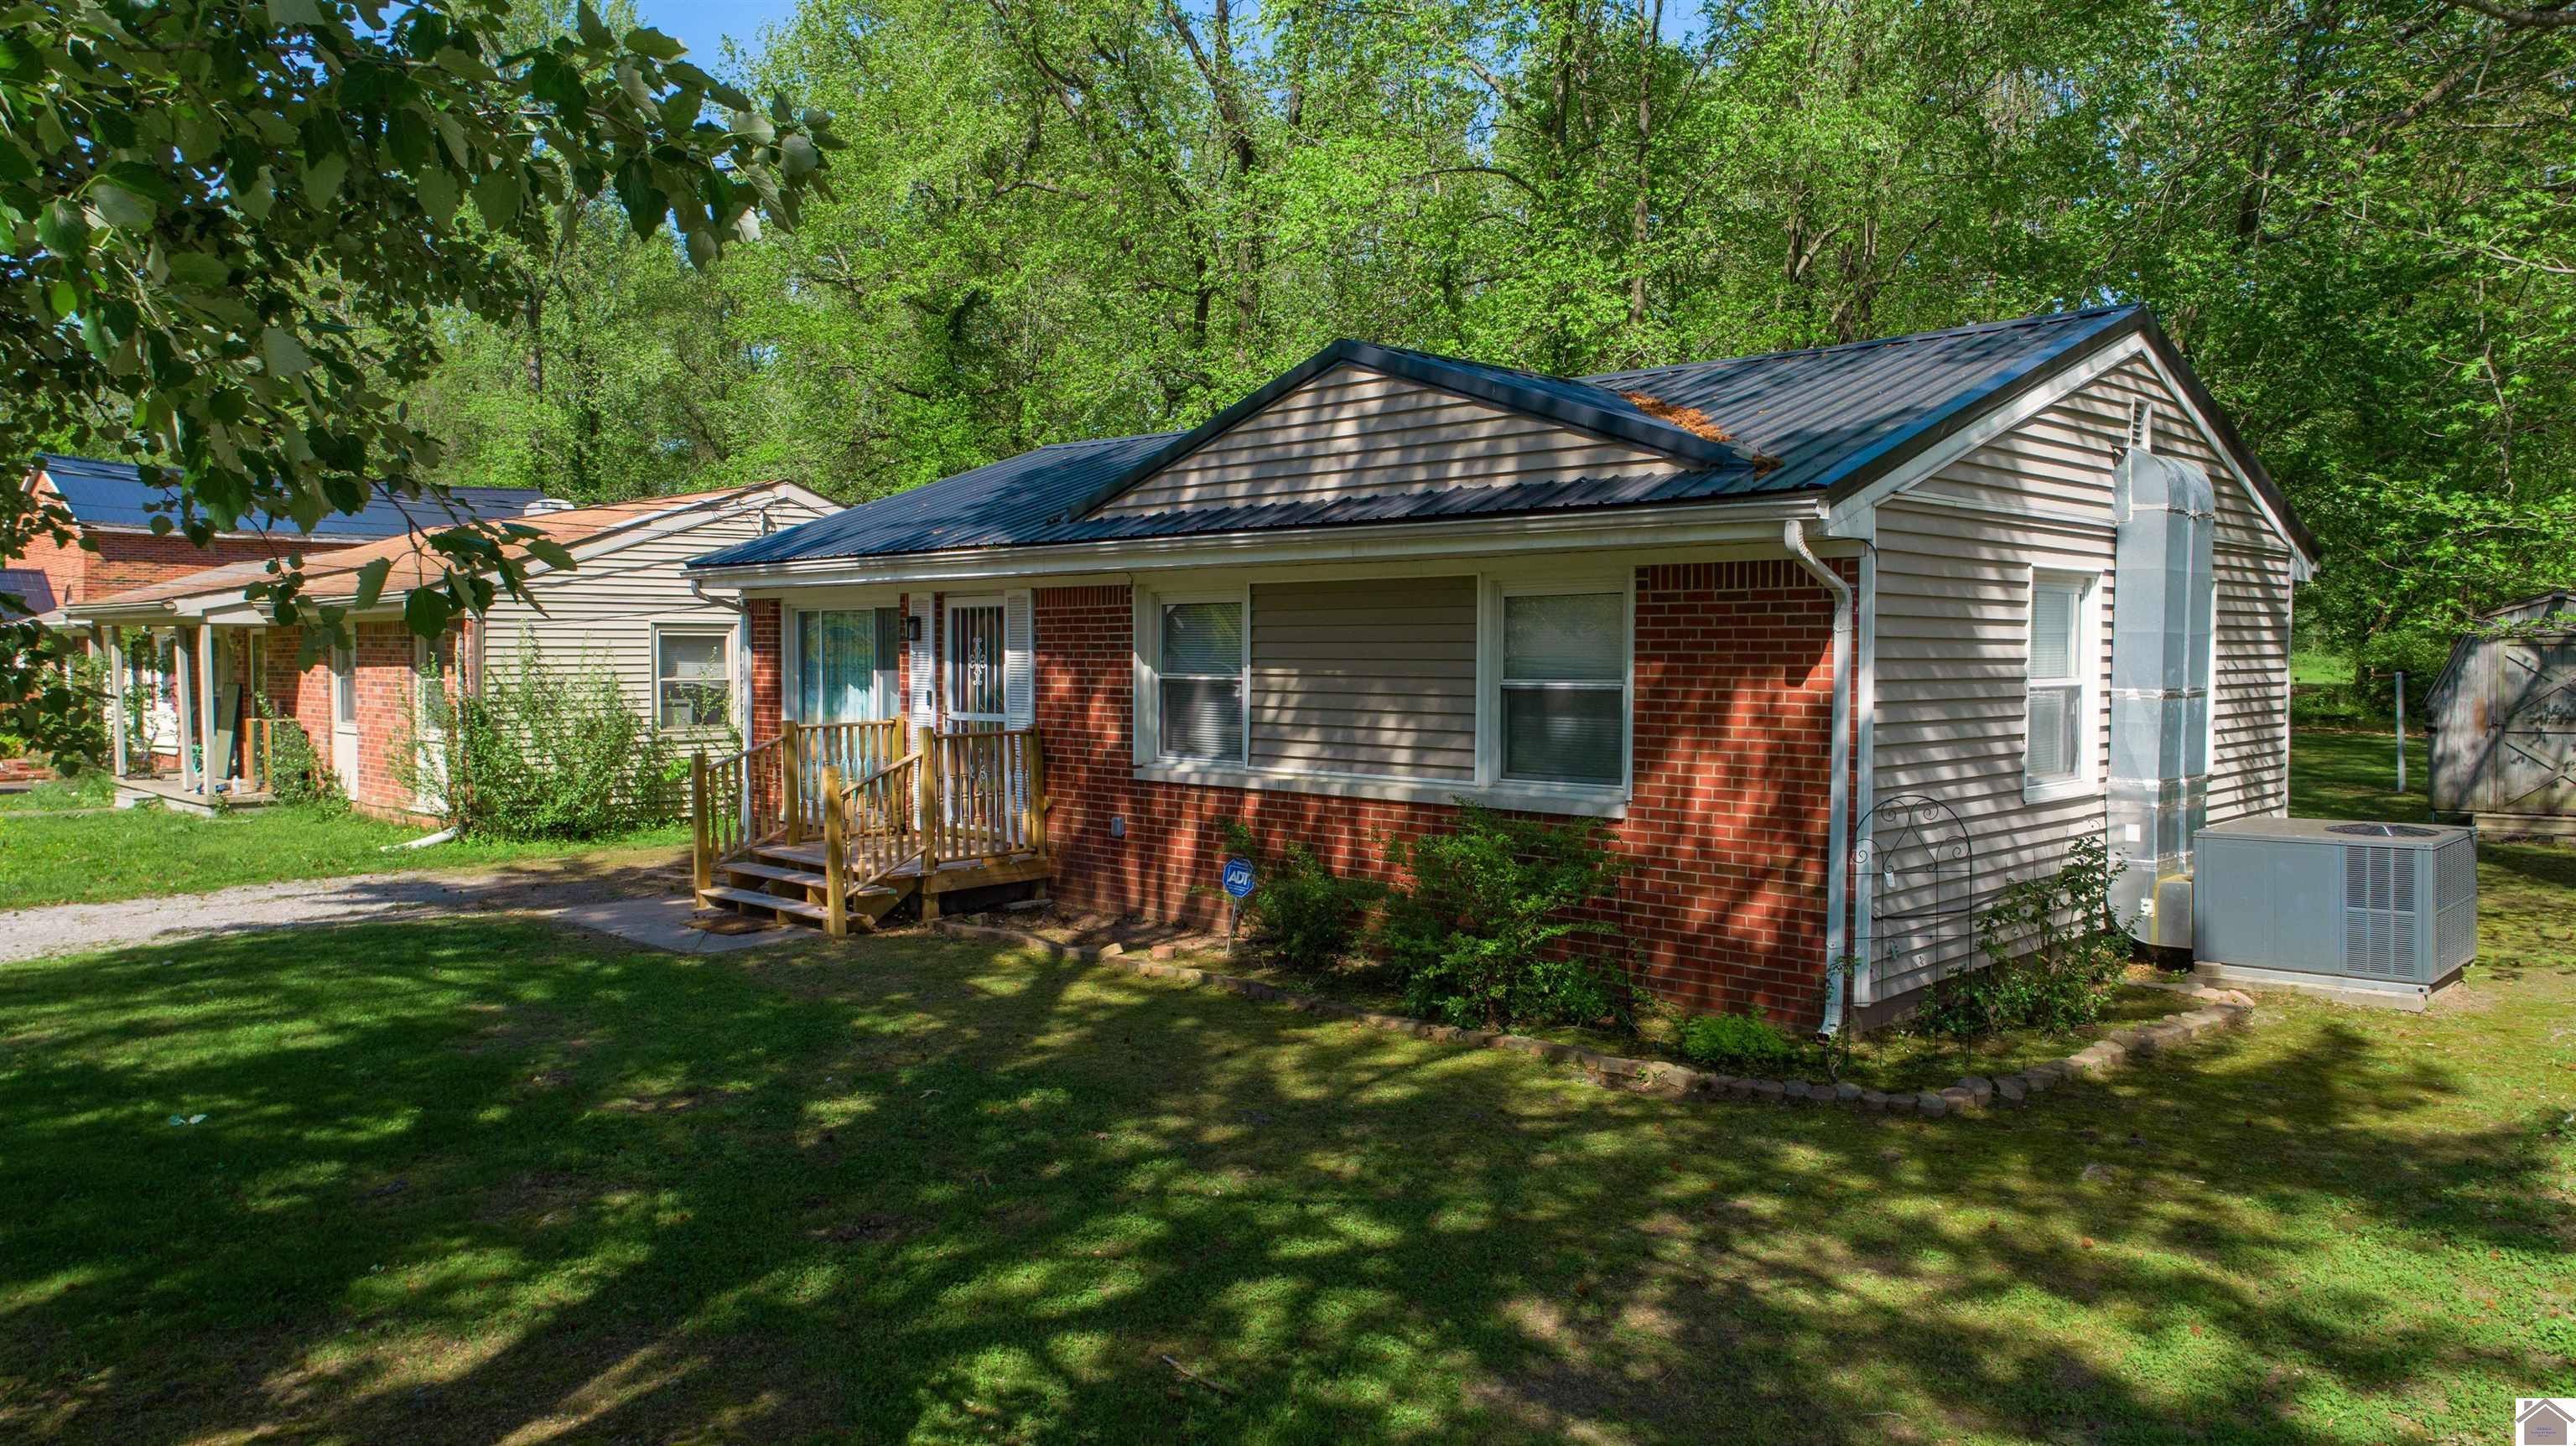 742 Levin Ave, Paducah, KY 42003 Listing Photo  4